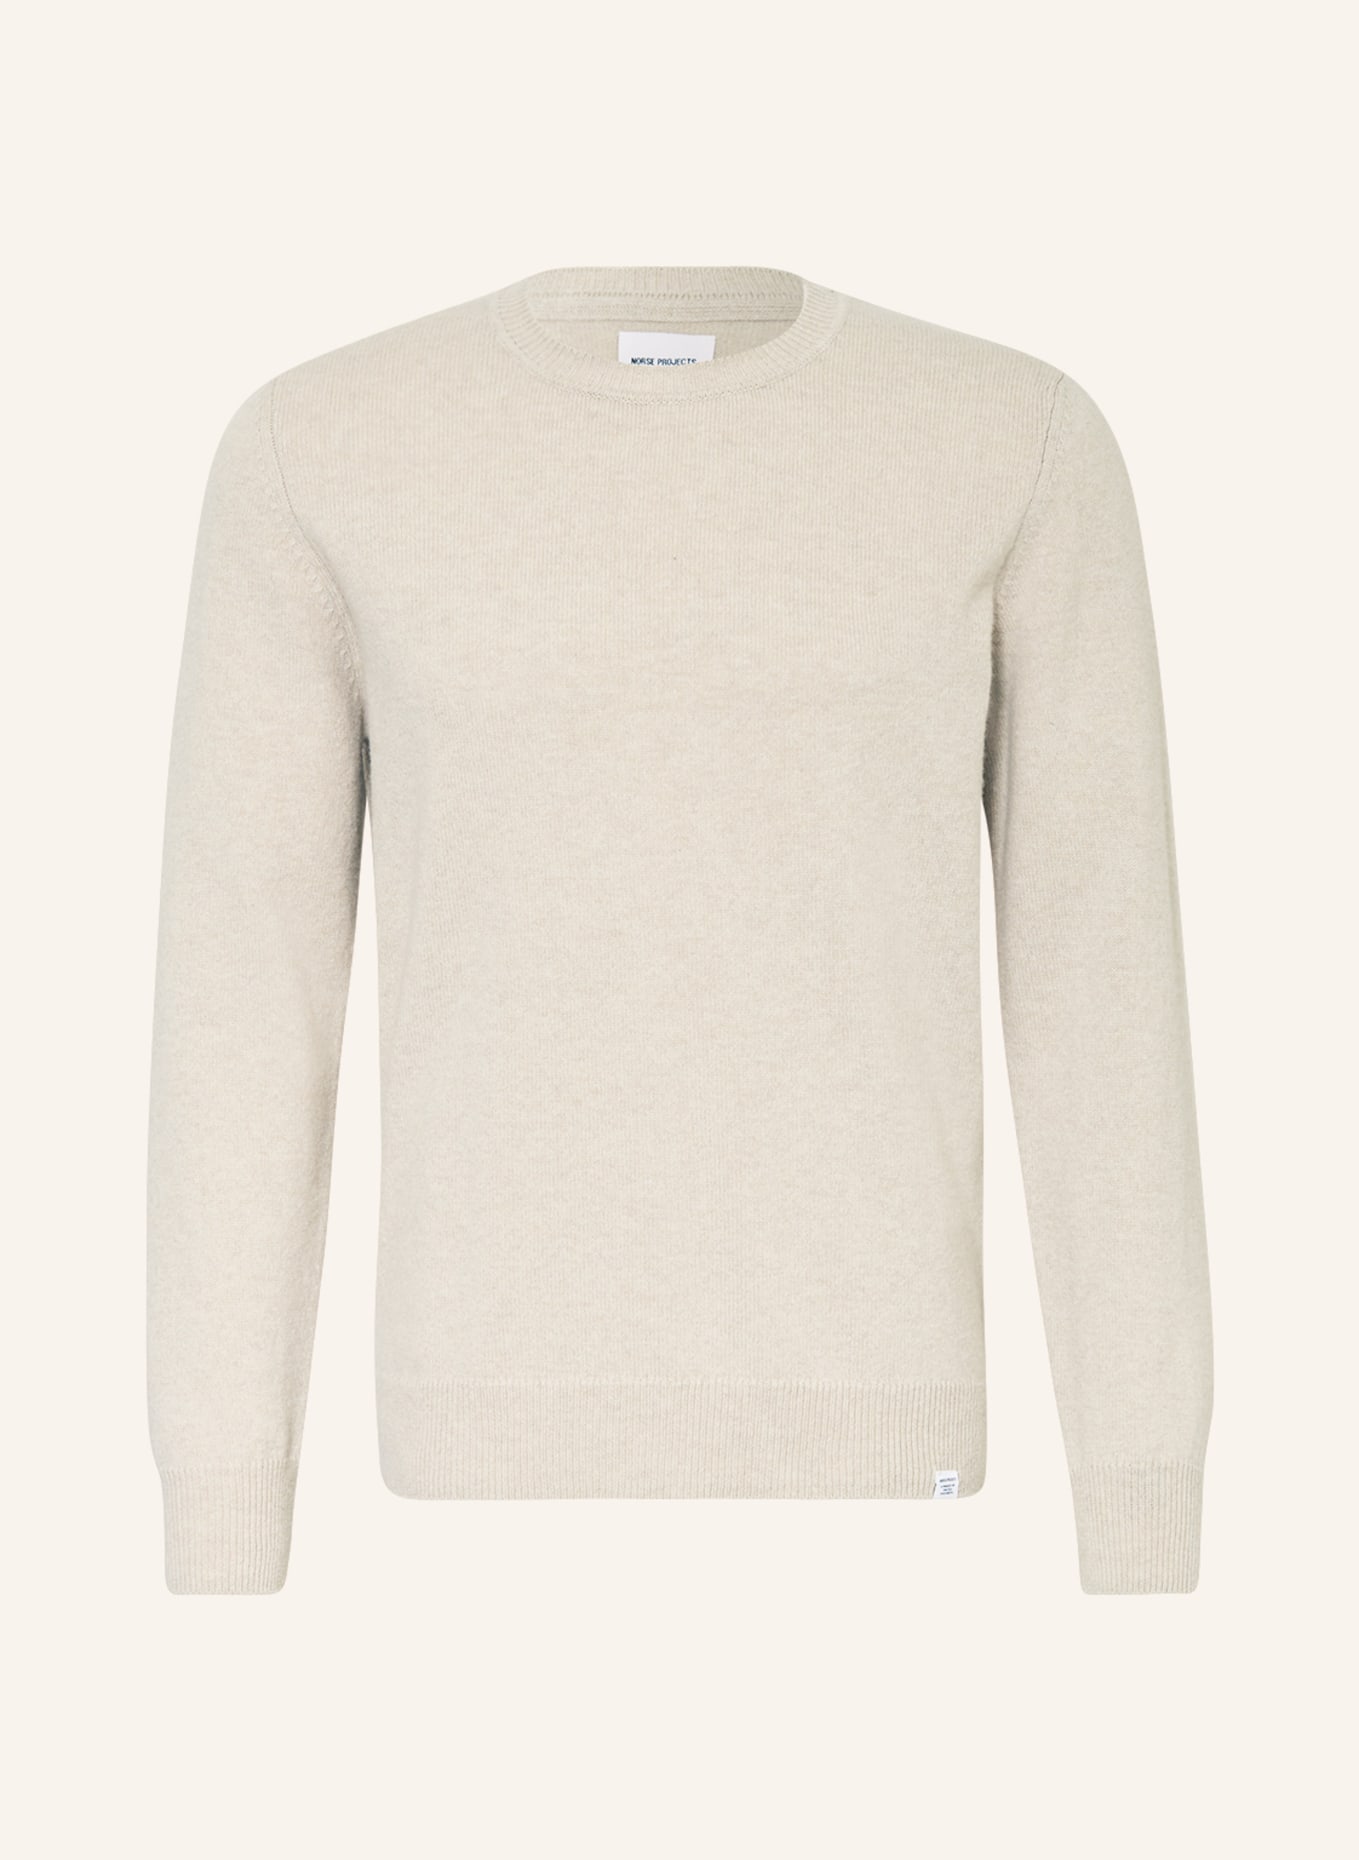 Свитер NORSE PROJECTS SIGFRED, кремовый джемпер norse projects sigfred lambswool knit серый